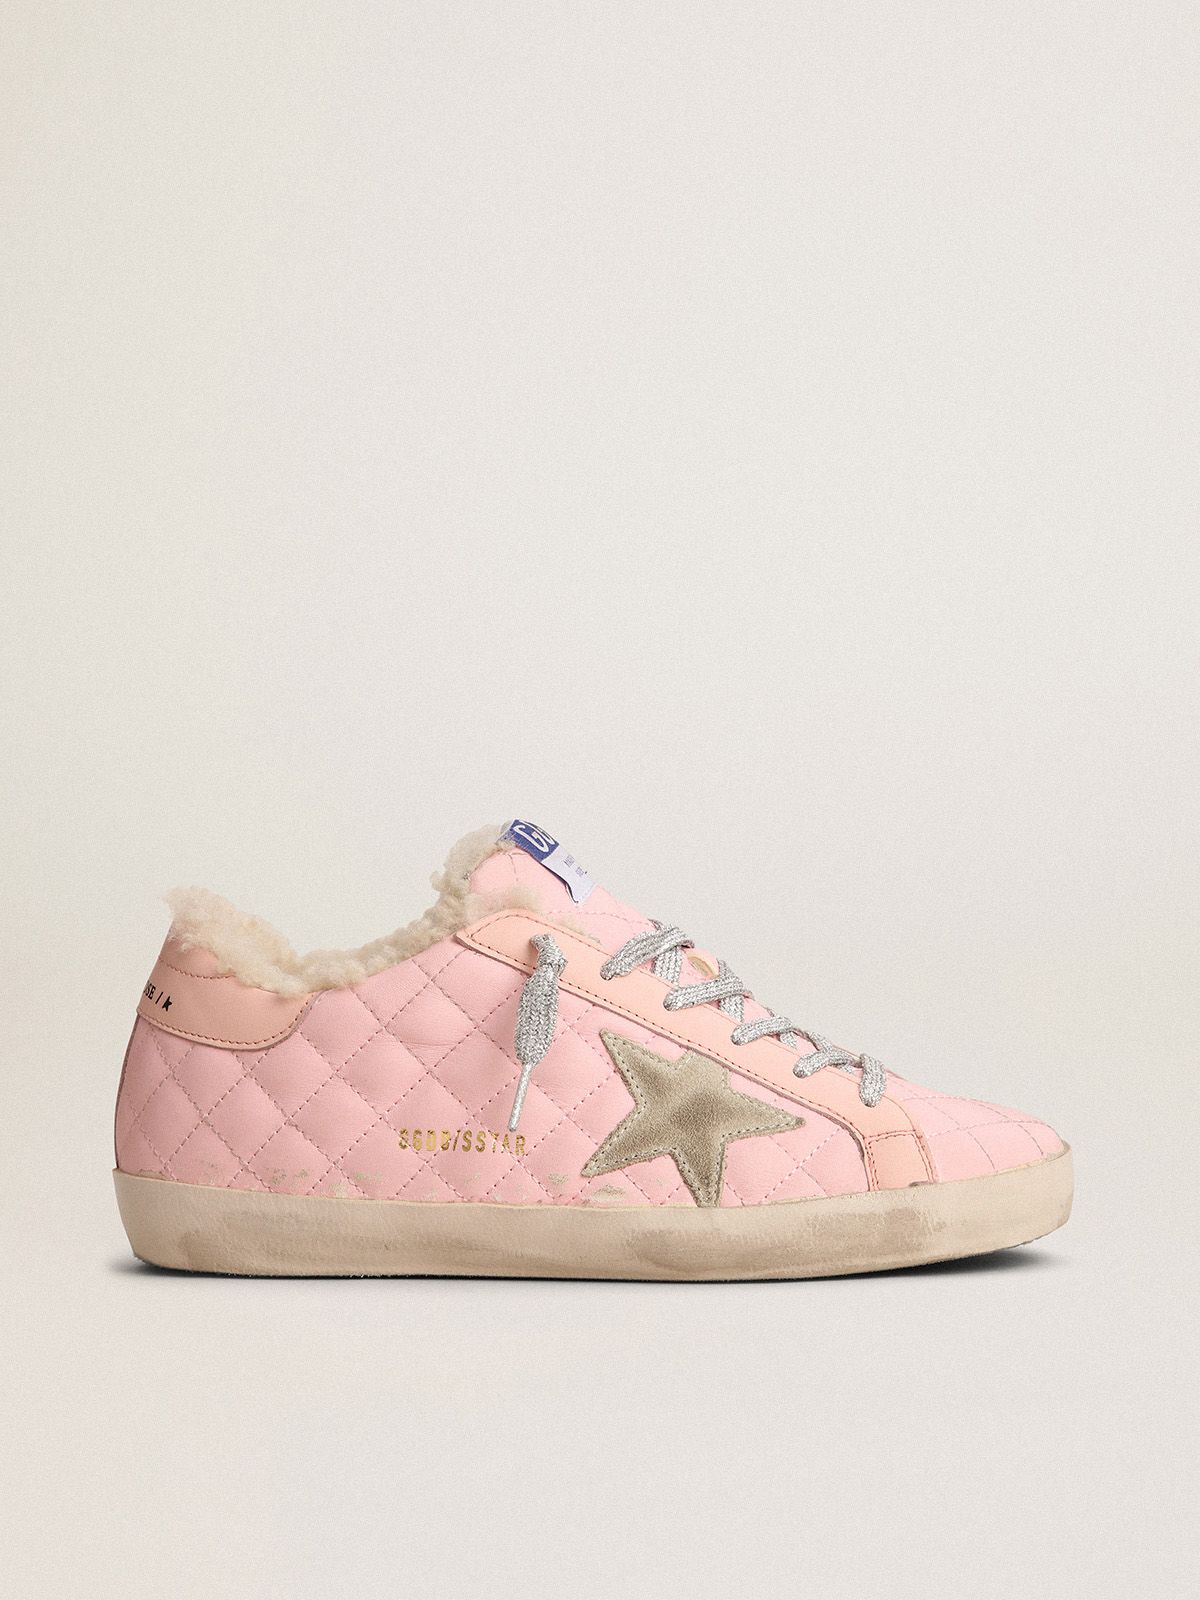 Sneakers Uomo Golden Goose Super-Star sneakers in pink quilted leather with shearling lining